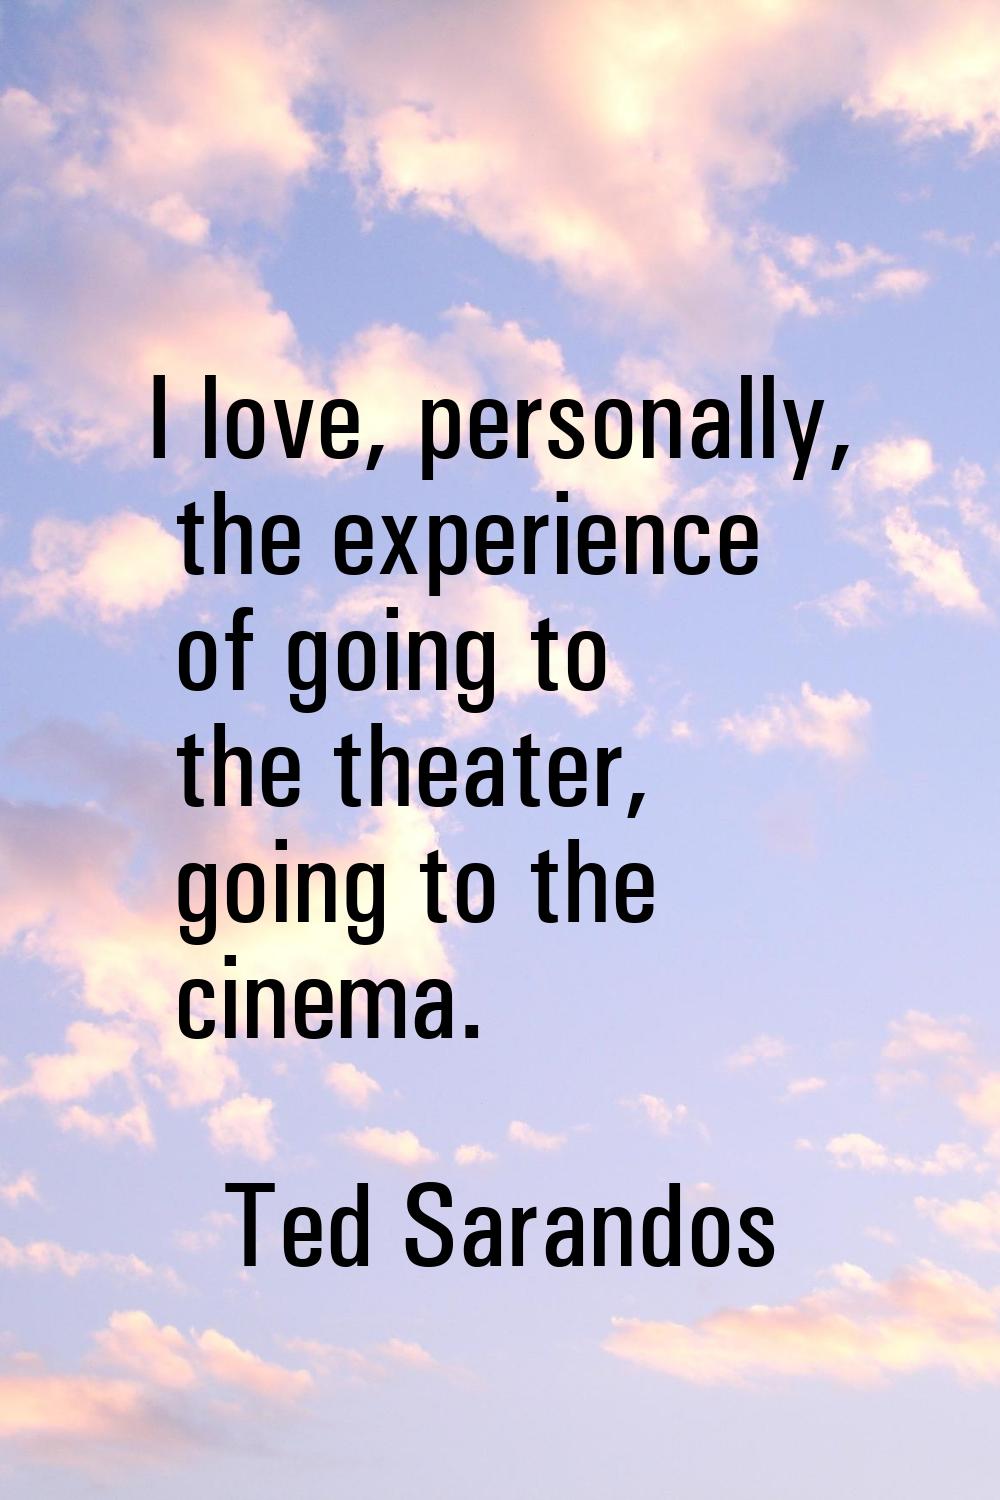 I love, personally, the experience of going to the theater, going to the cinema.